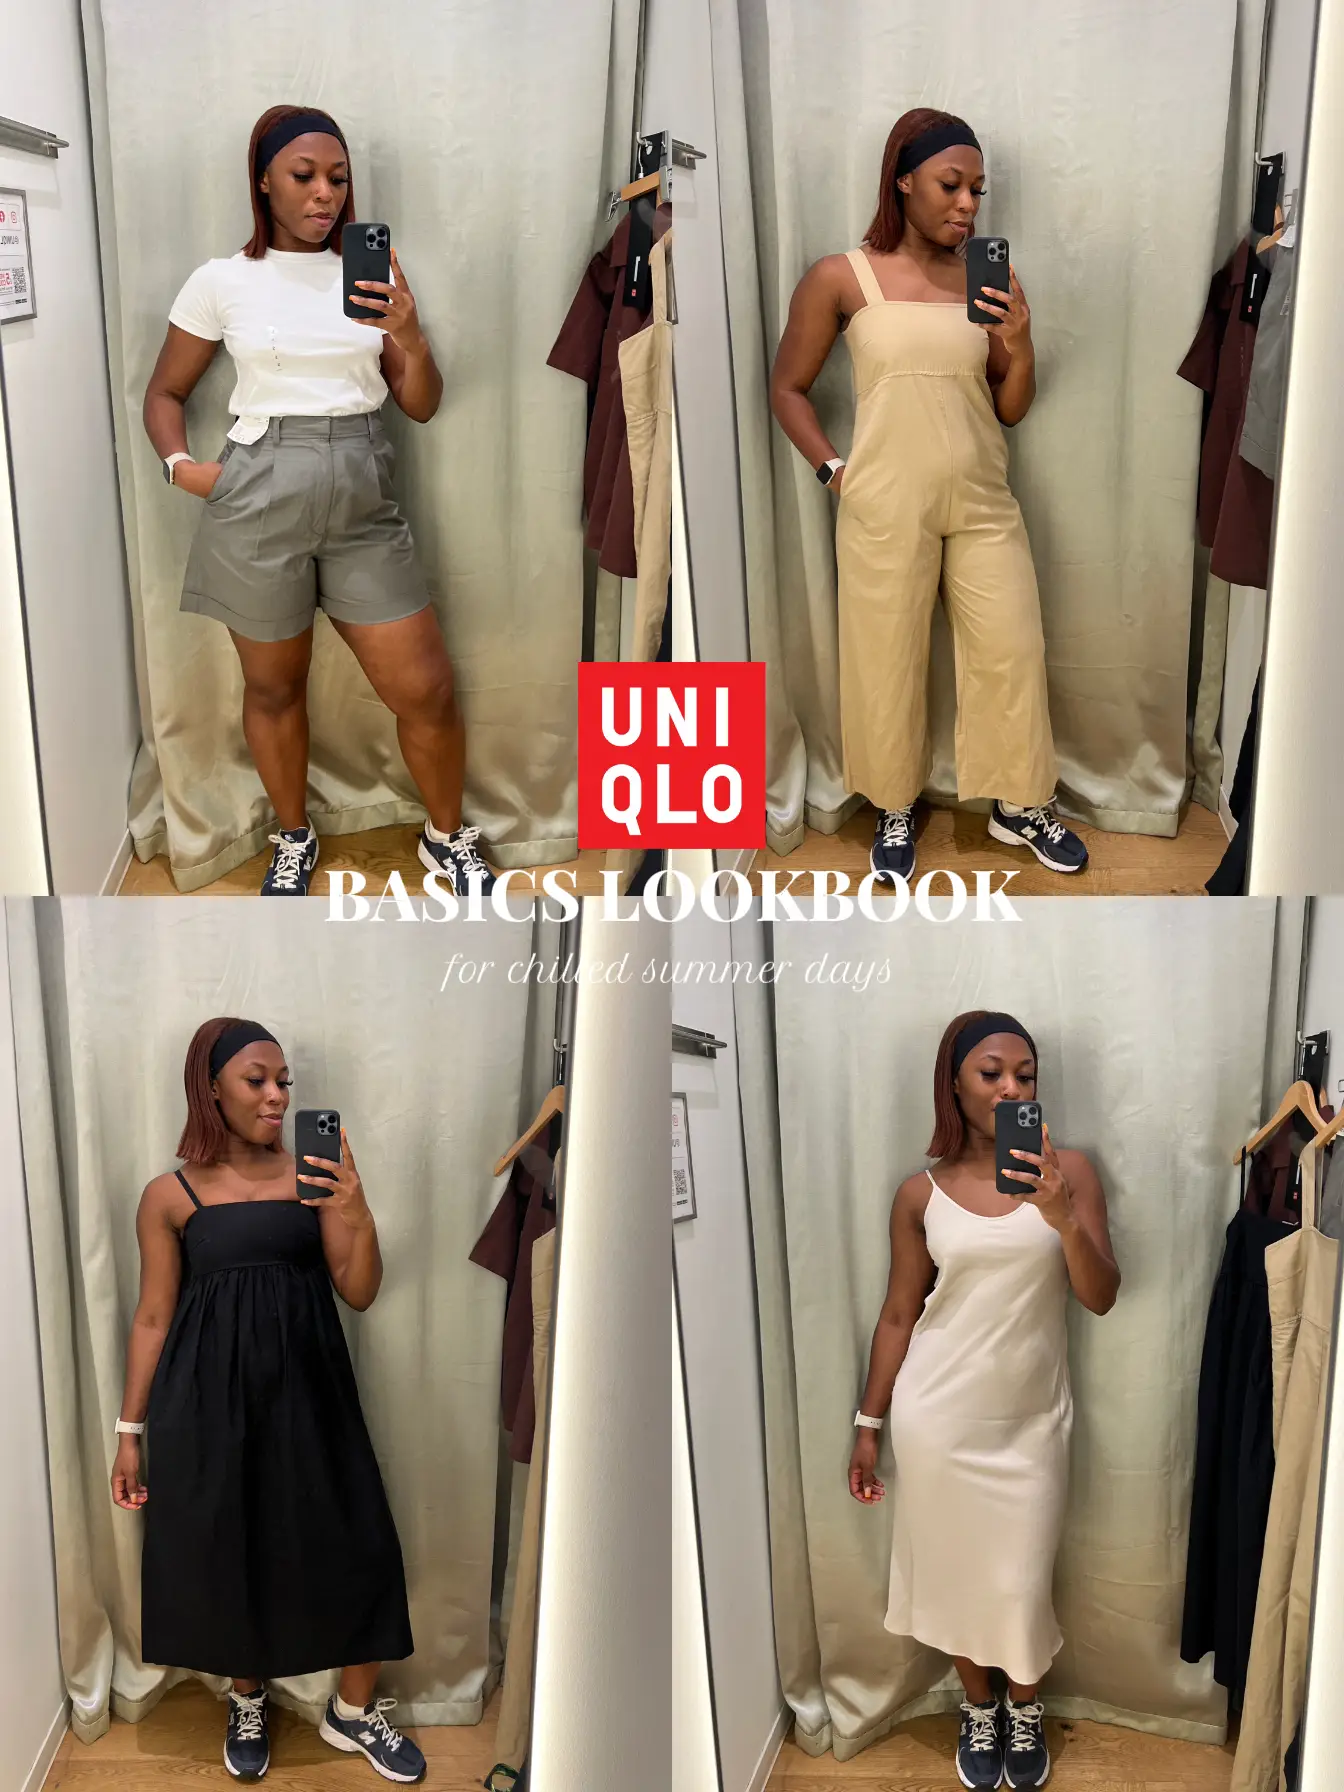 New In Summer Basics at Uniqlo!  Gallery posted by lexuscrystal